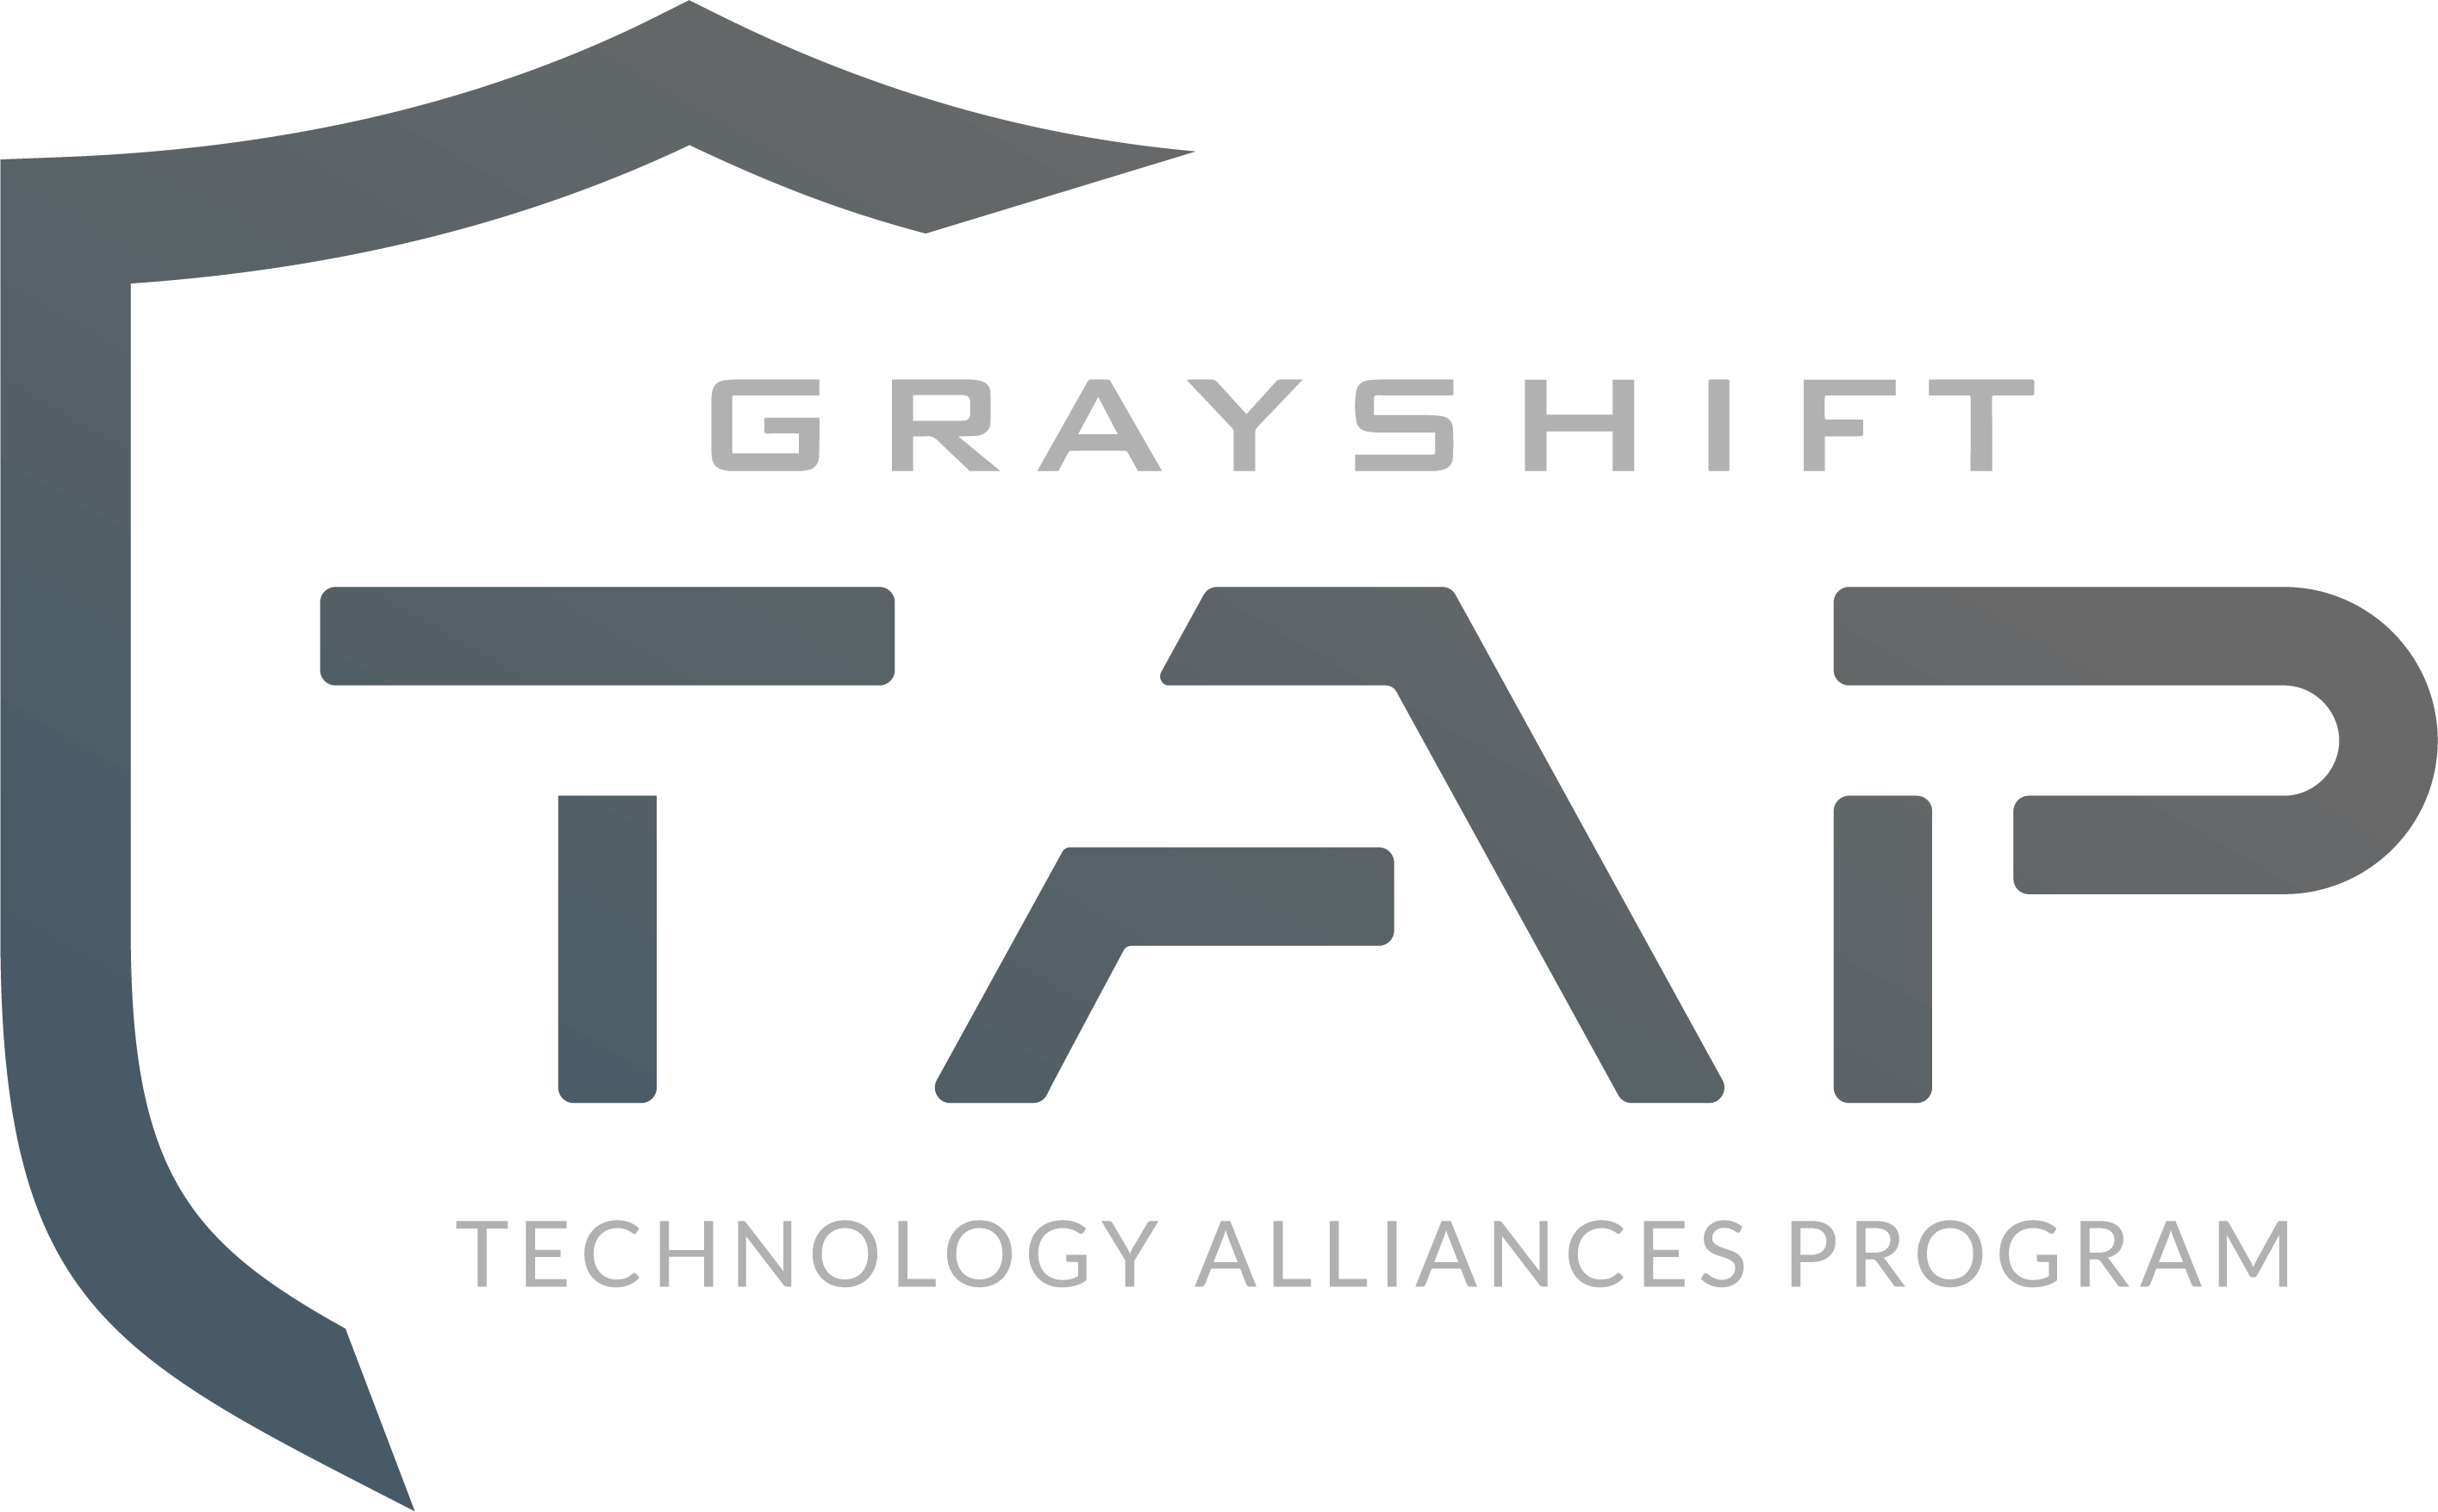 Grayshift’s Technology Alliances Program is a Digital Forensics ecosystem that facilitates open, multi-vendor integration and certifications to improve the effectiveness of digital investigation tools.